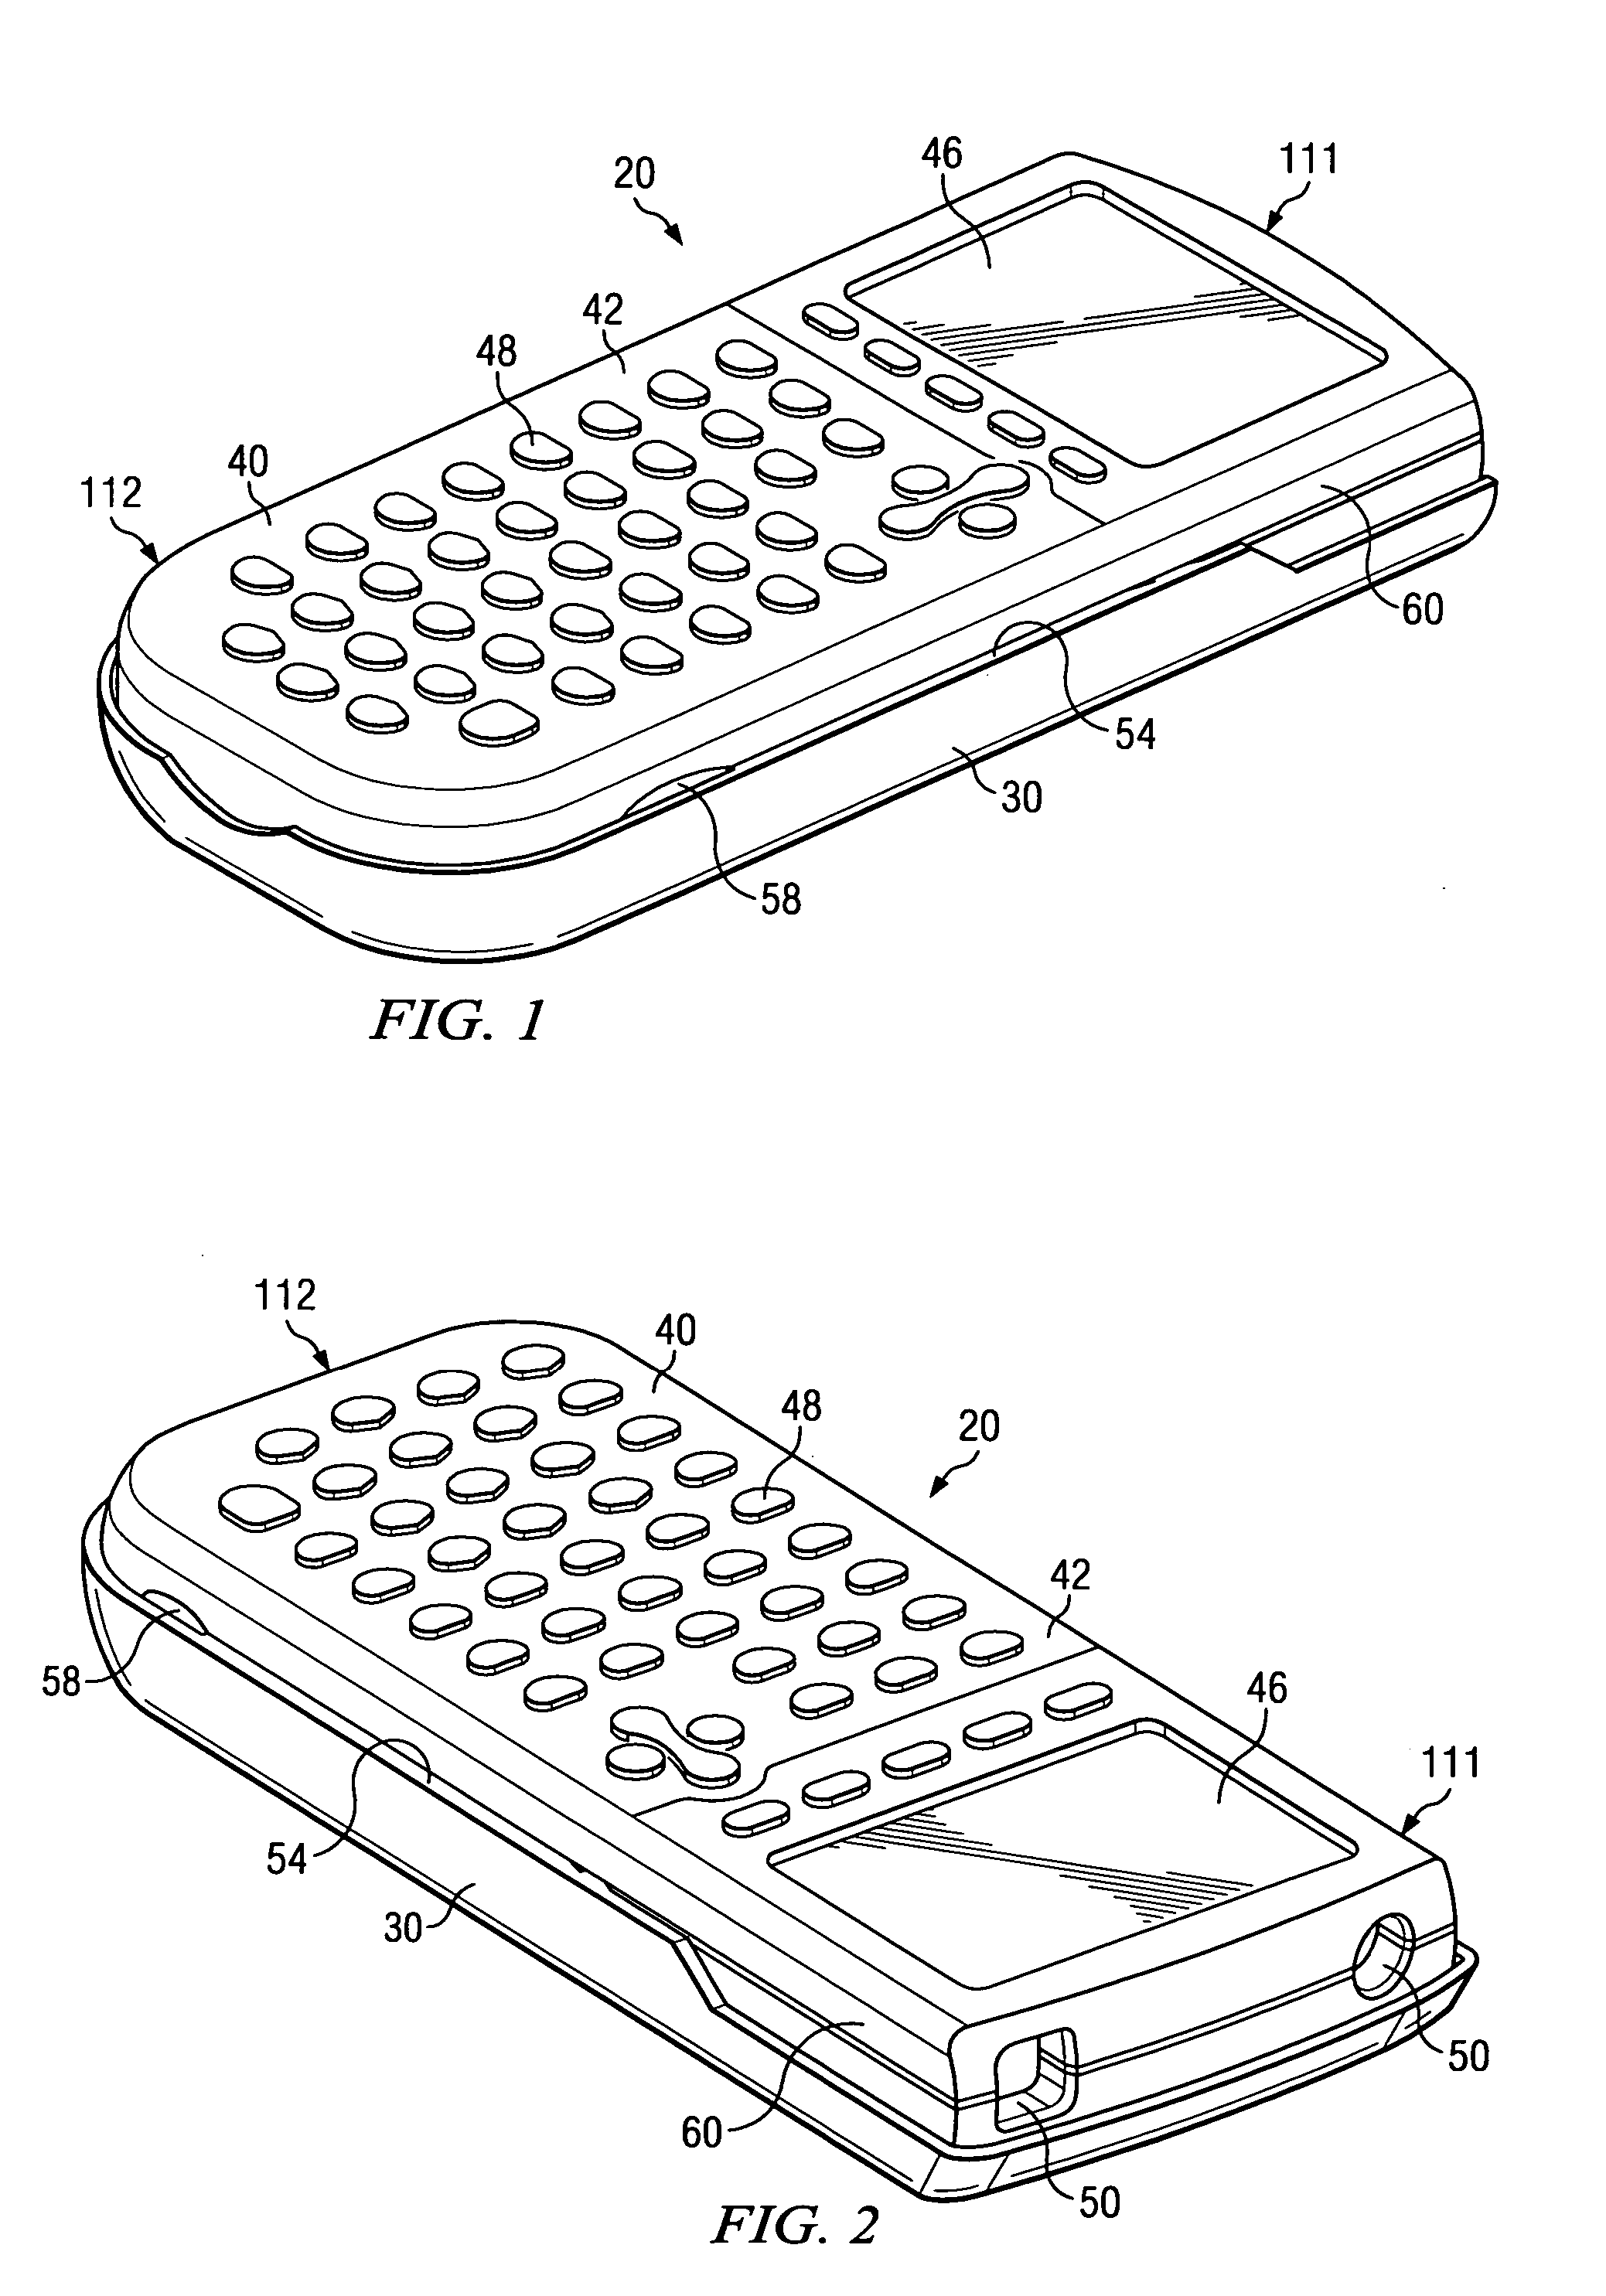 Slide case with pivotable stand member for handheld computing device